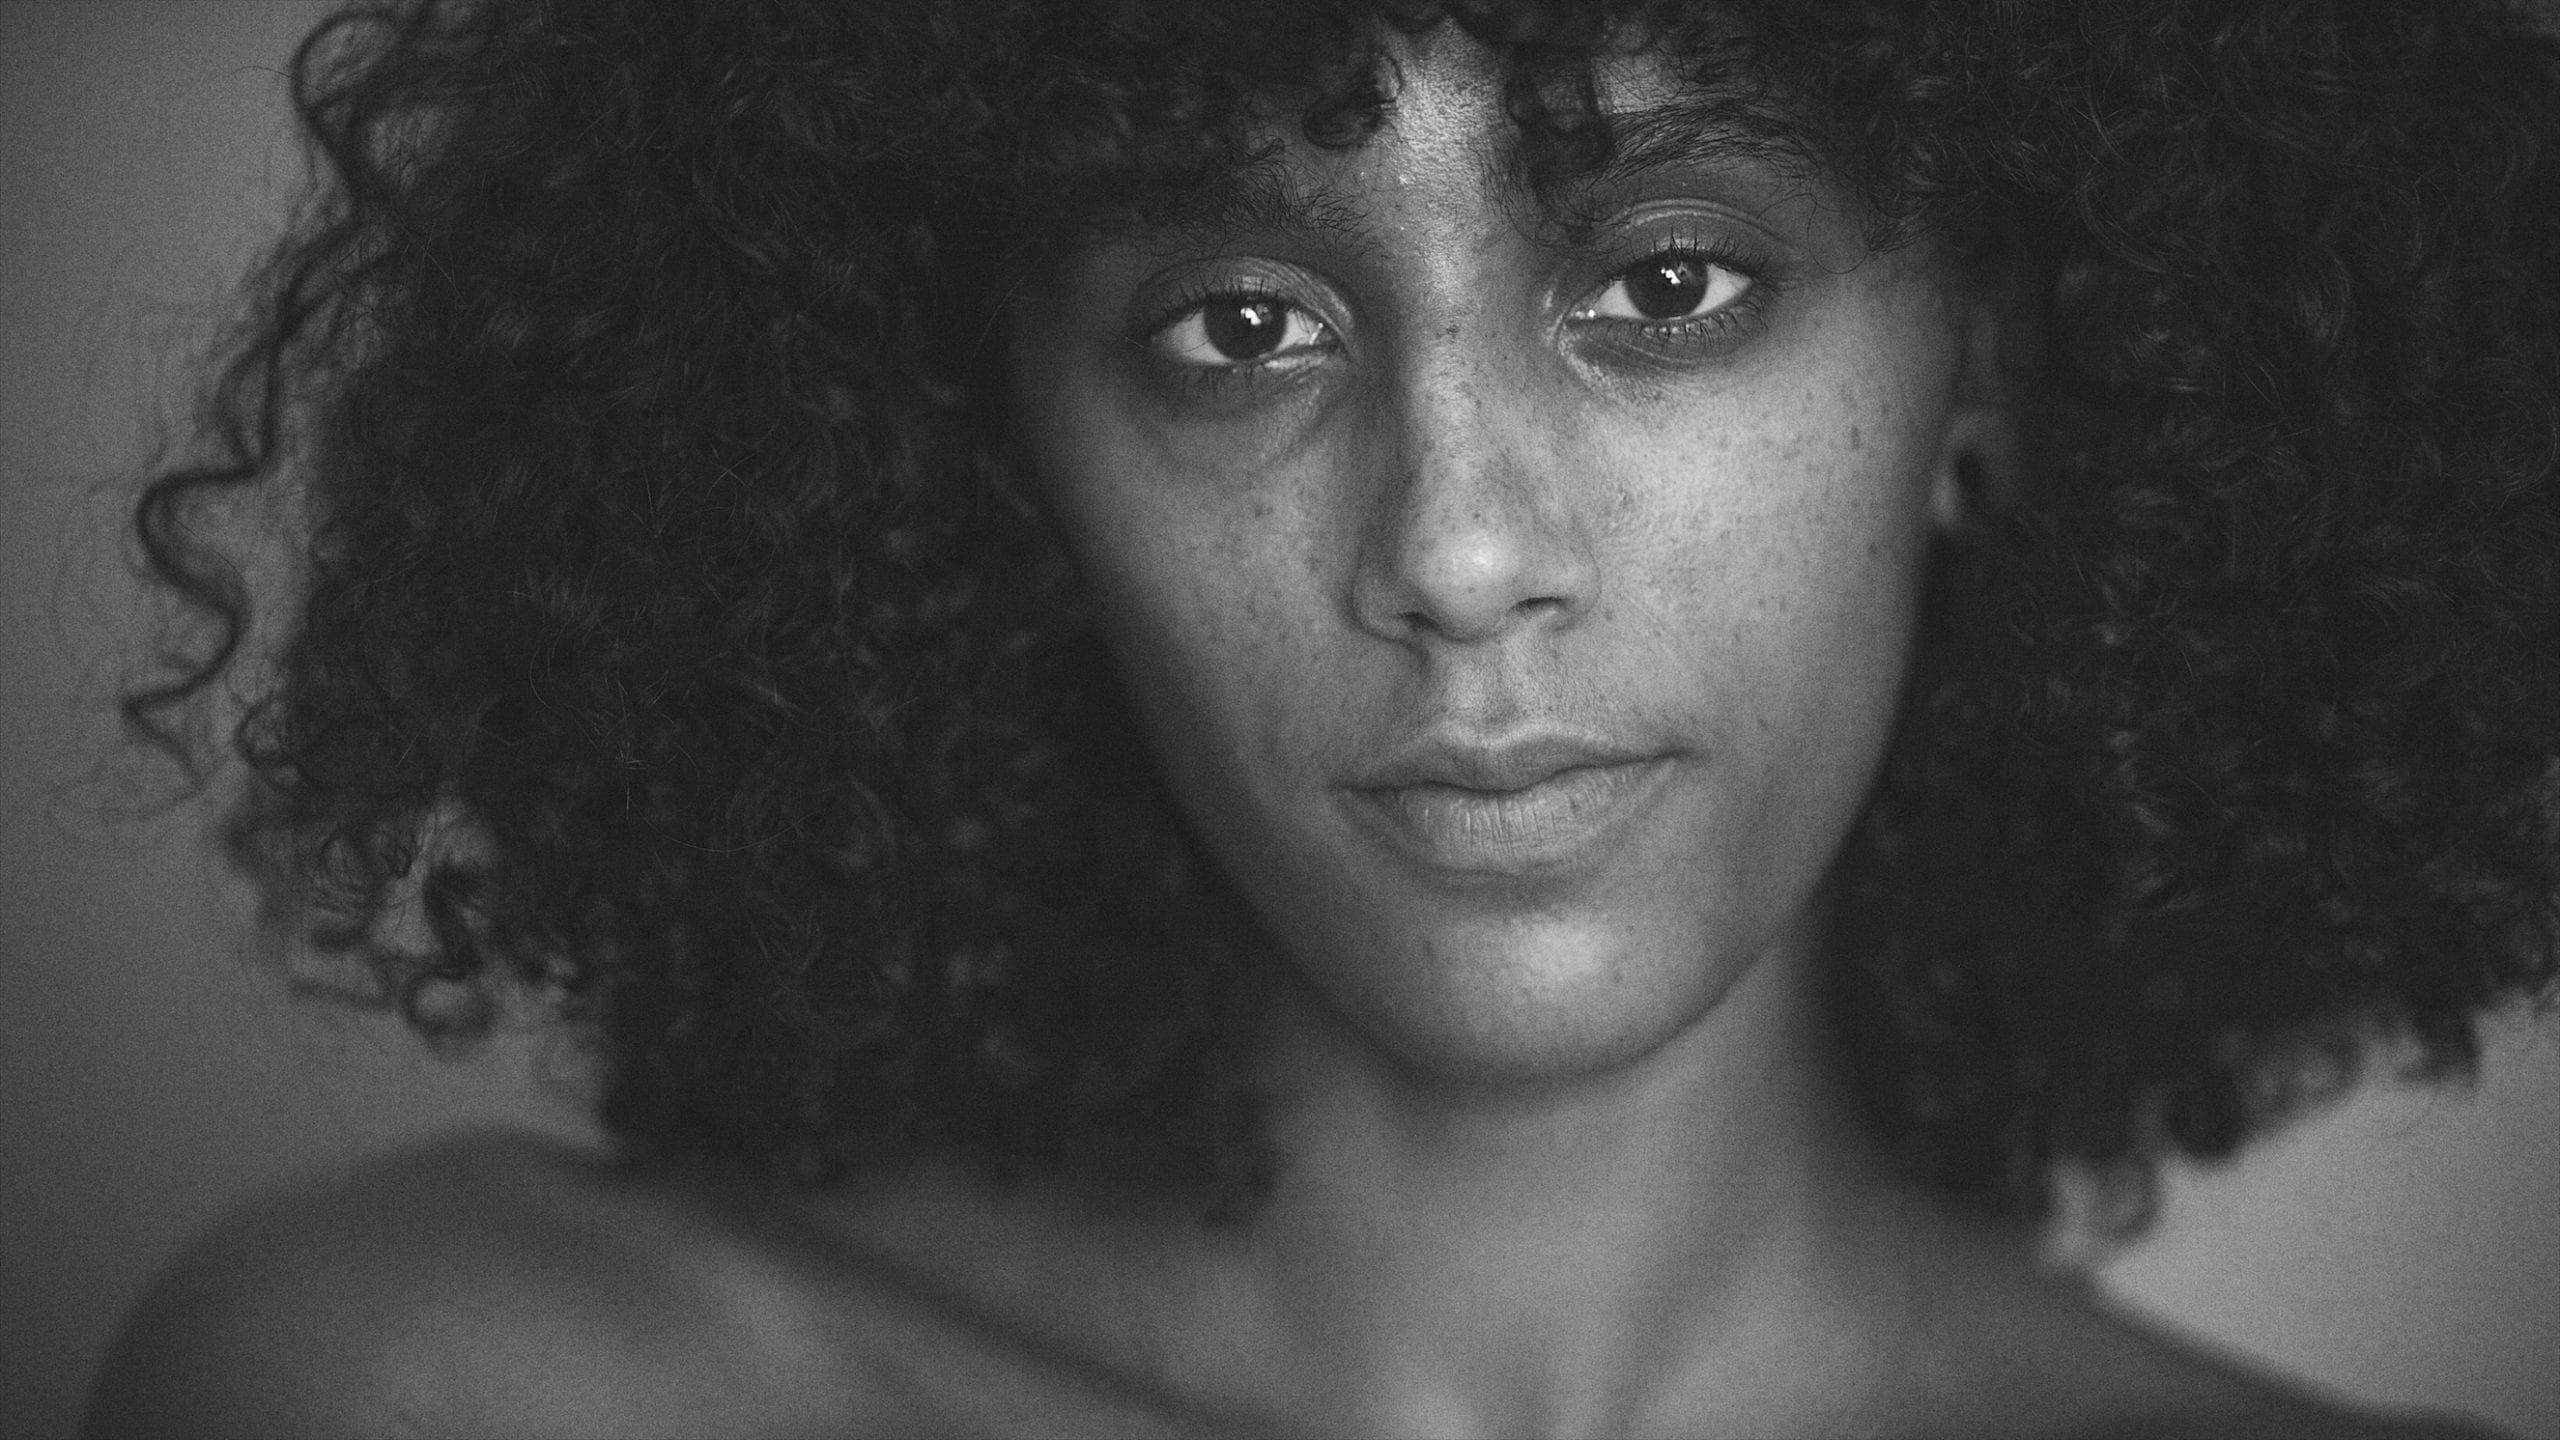 IU C&I Studios Post We knew South Florida Model, Jasmine, would be a great fit for this role. Just look at those eyes! Black and white